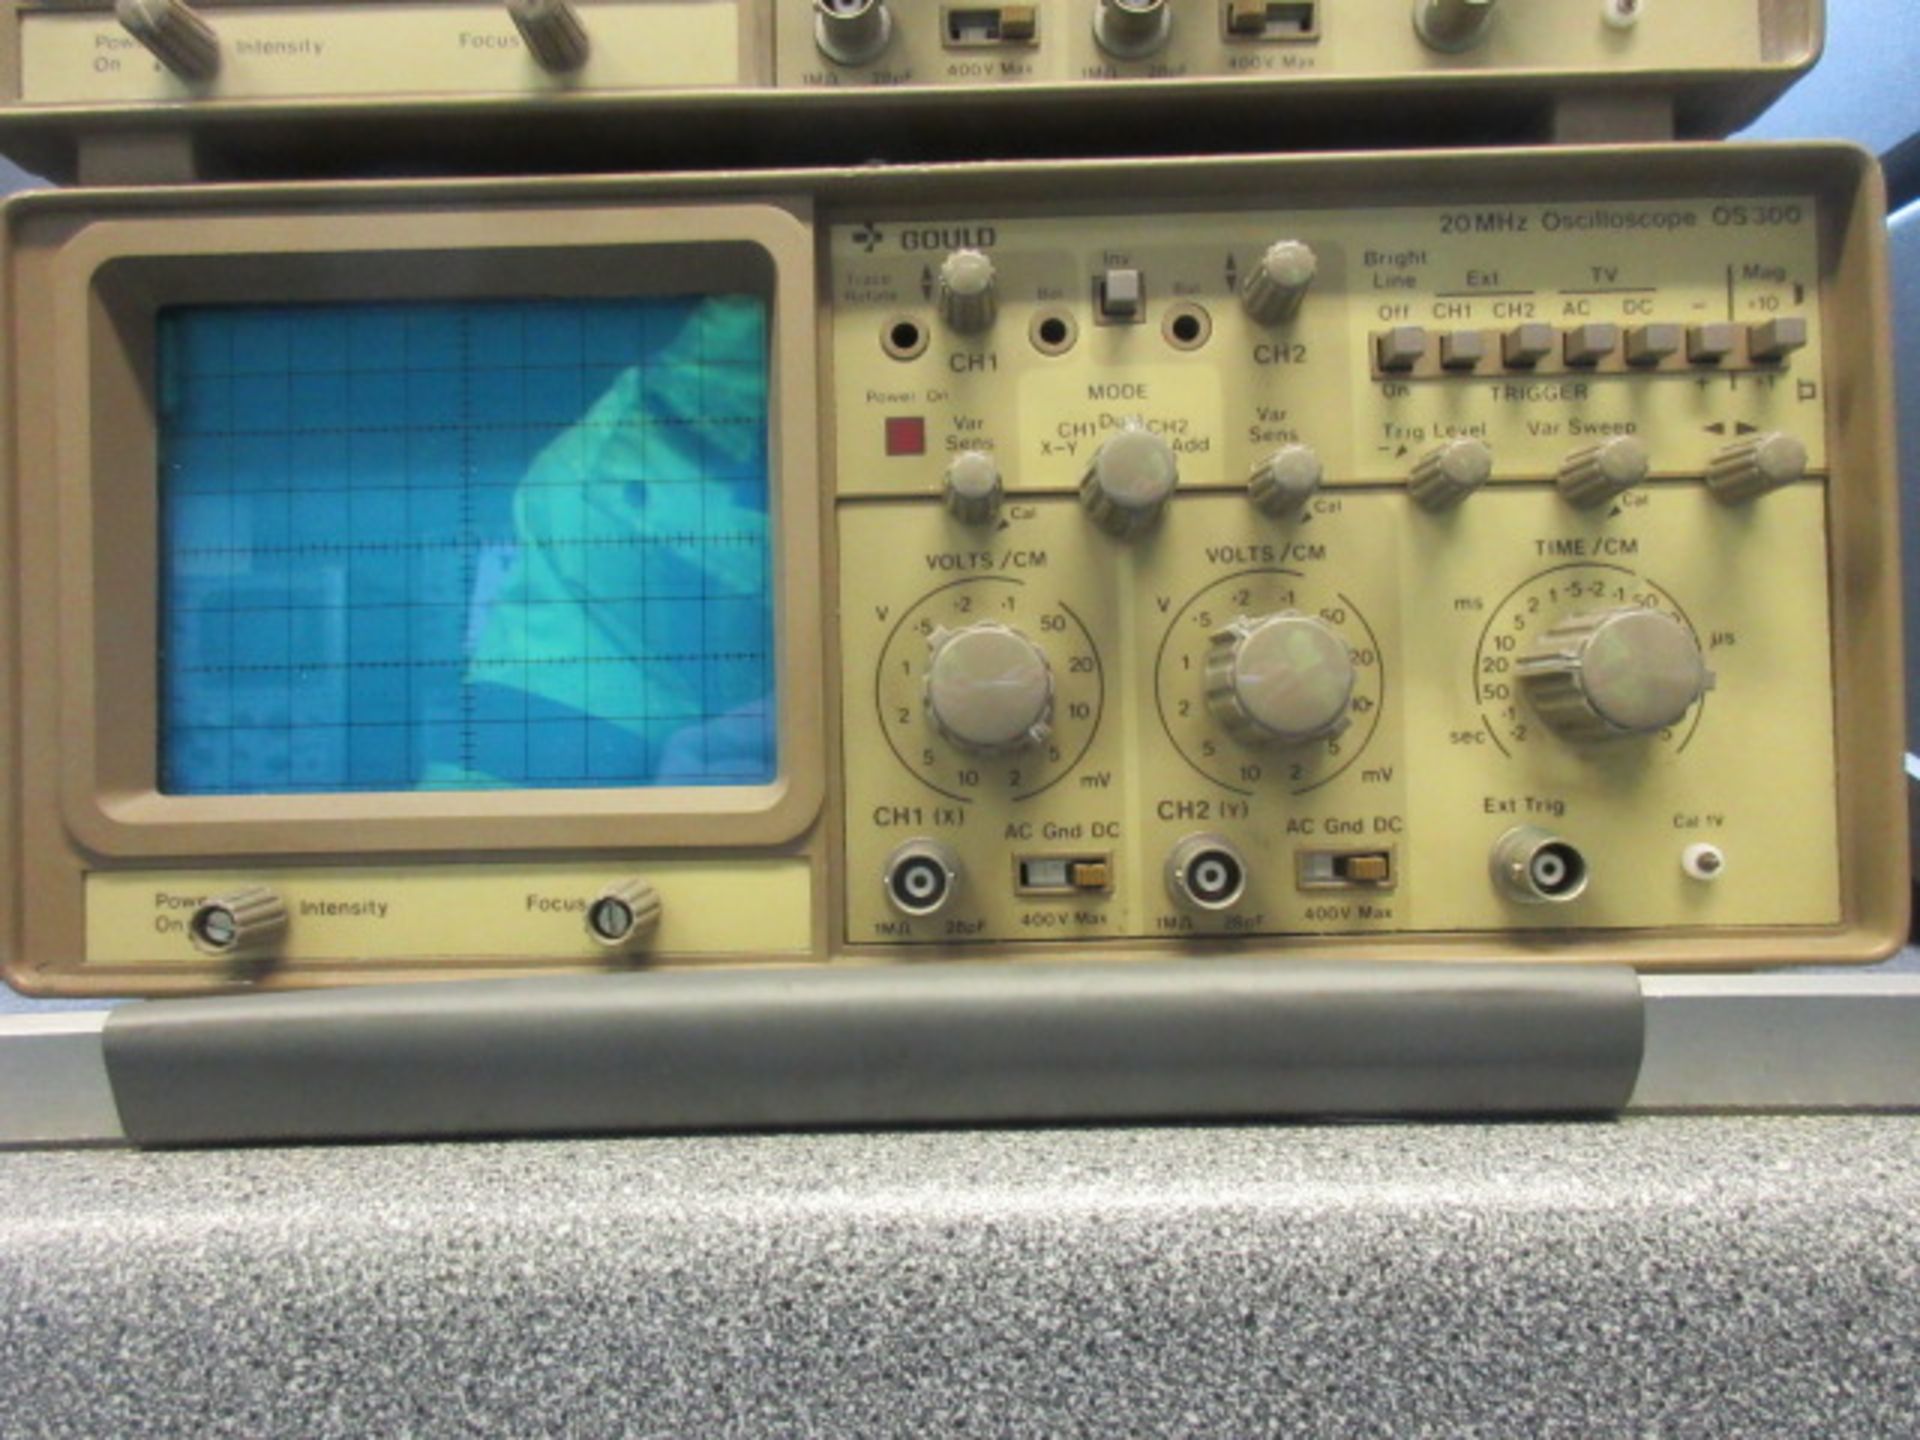 TWO GOULD 20 MHz 0S300 OSCILLOSCOPES - Image 2 of 3